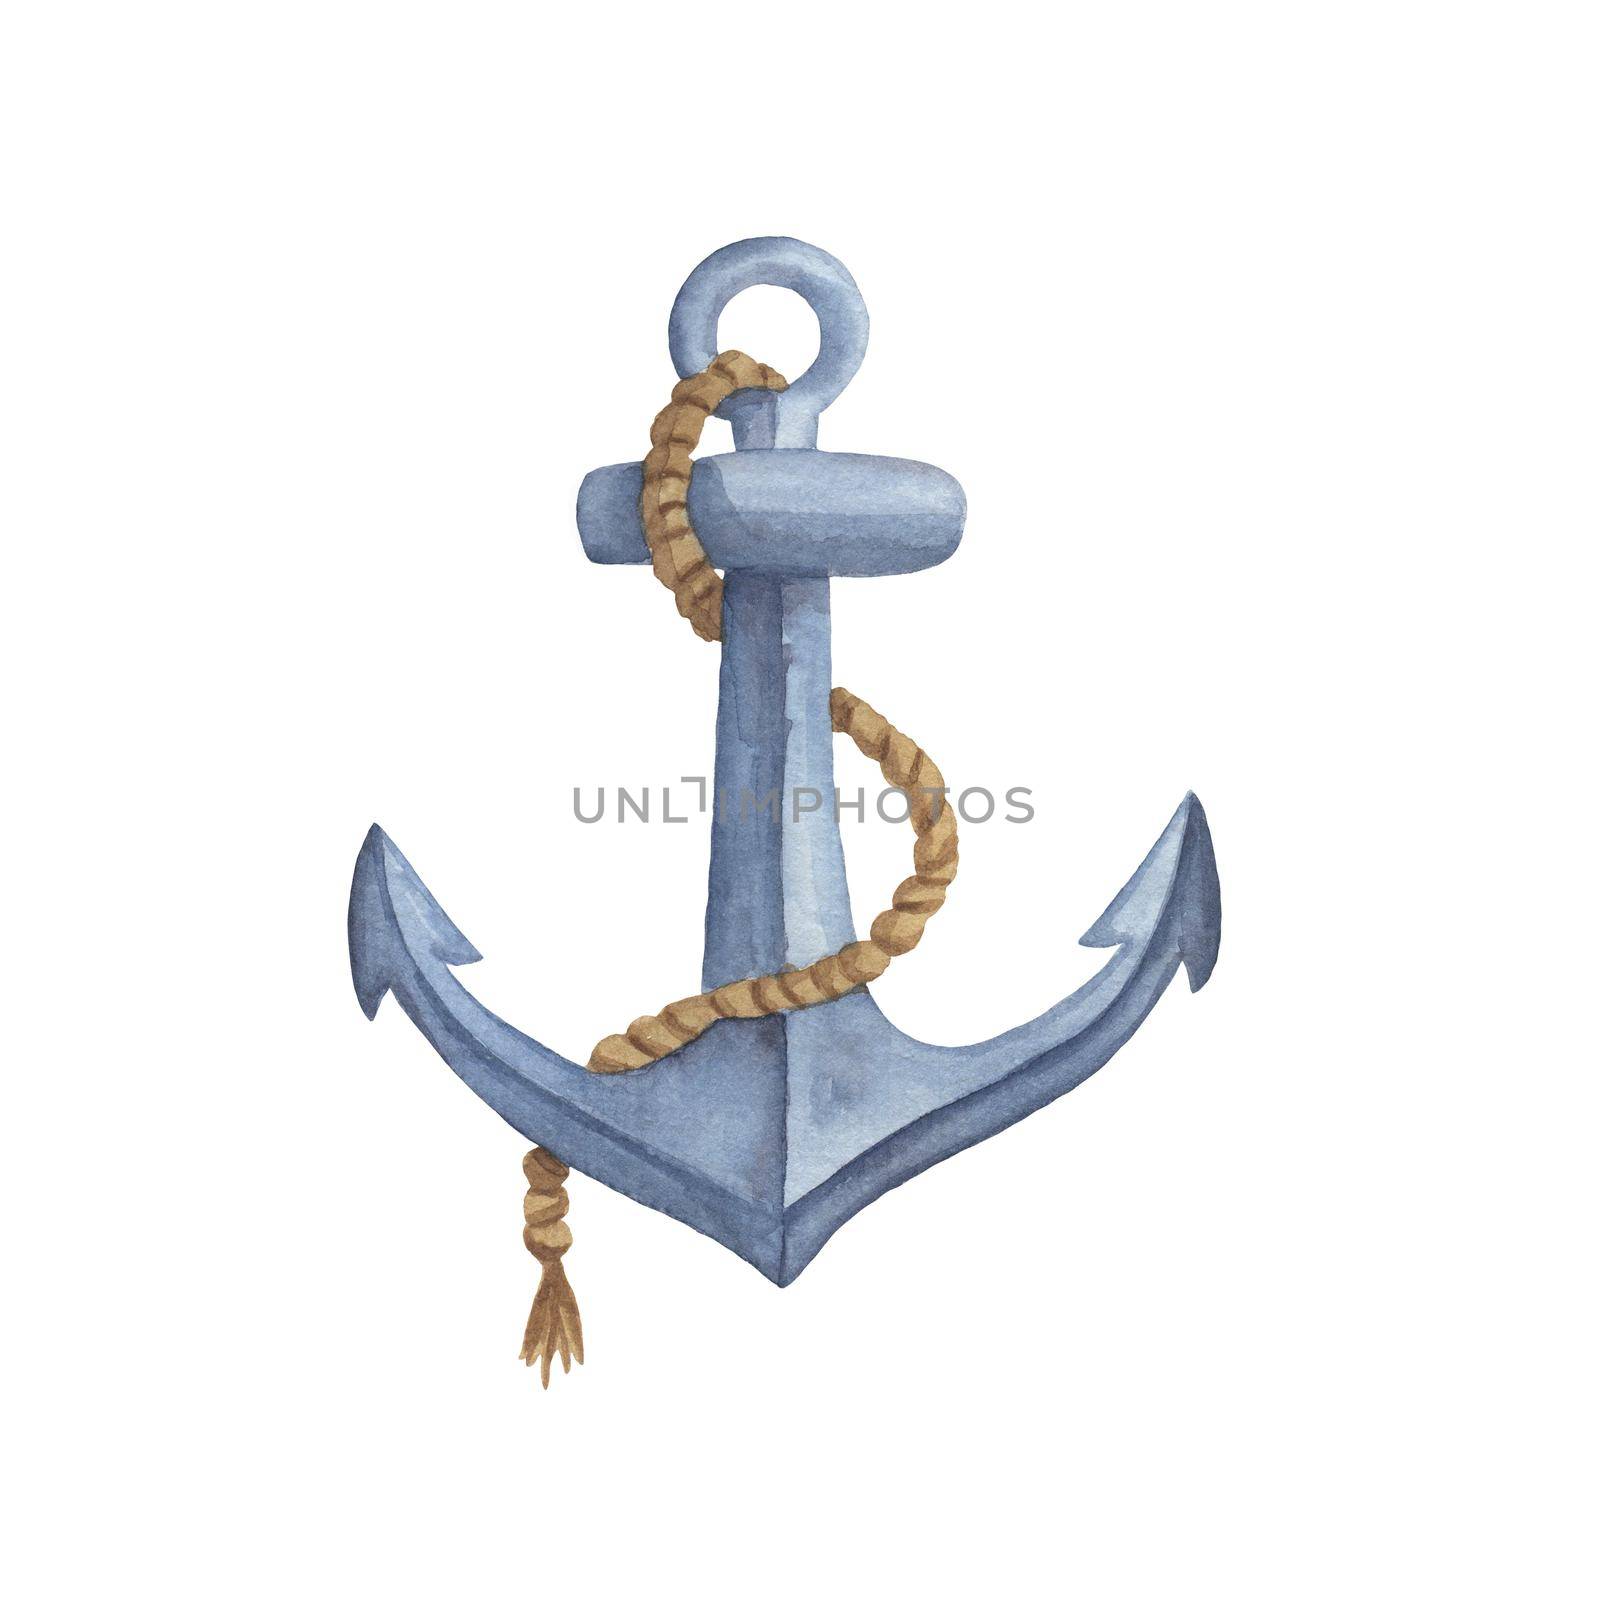 Watercolor vintage classic anchor with rope isolated on a white background. Hand drawn marine illustration by ElenaPlatova